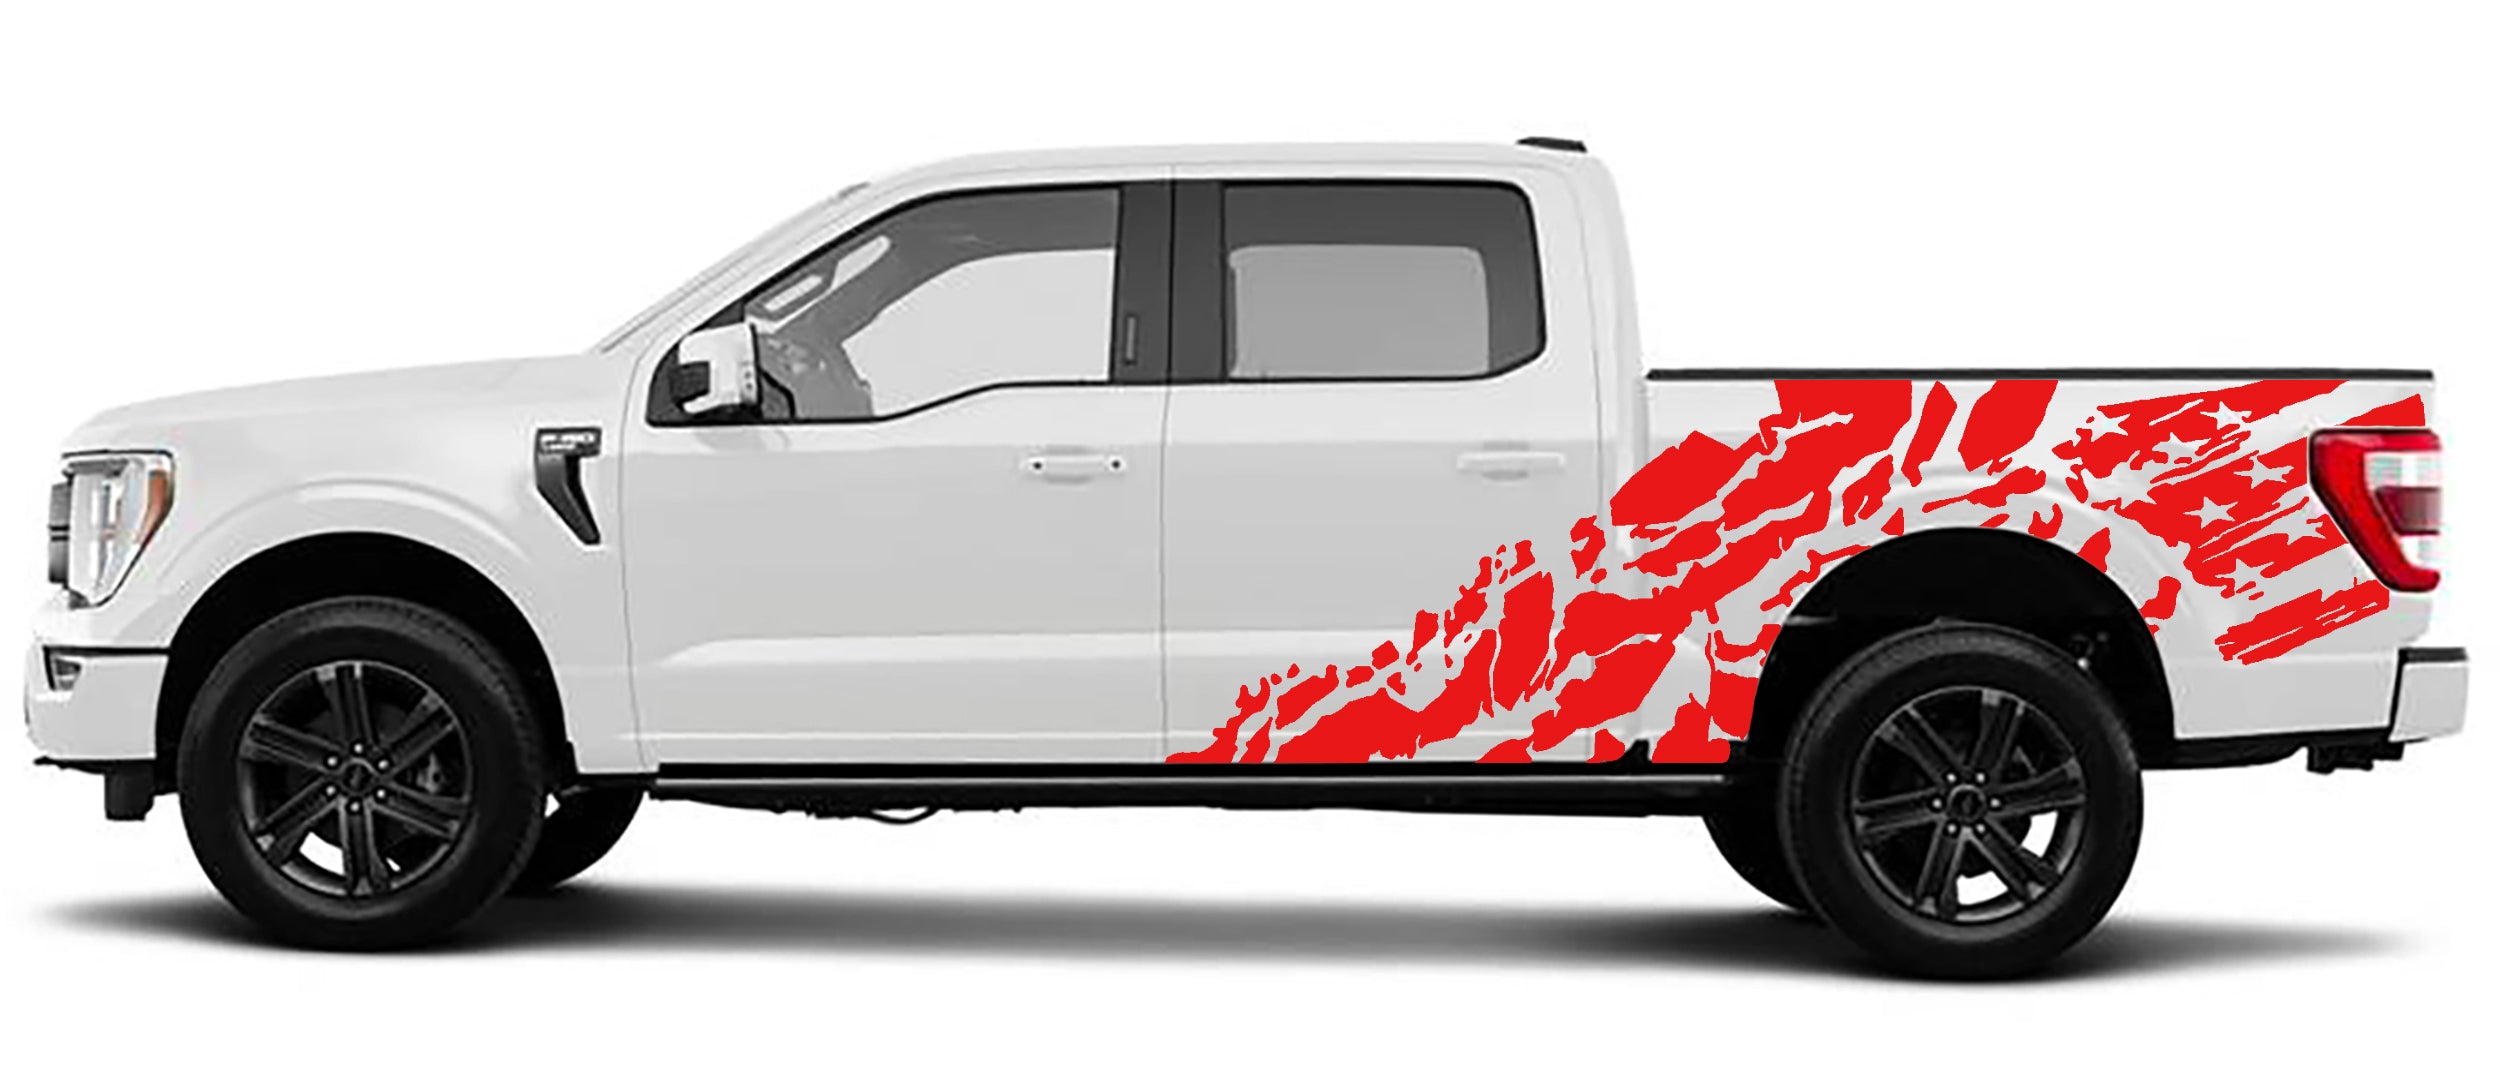 shredded american flag side graphics for ford f 150 2021 to 2023 models red